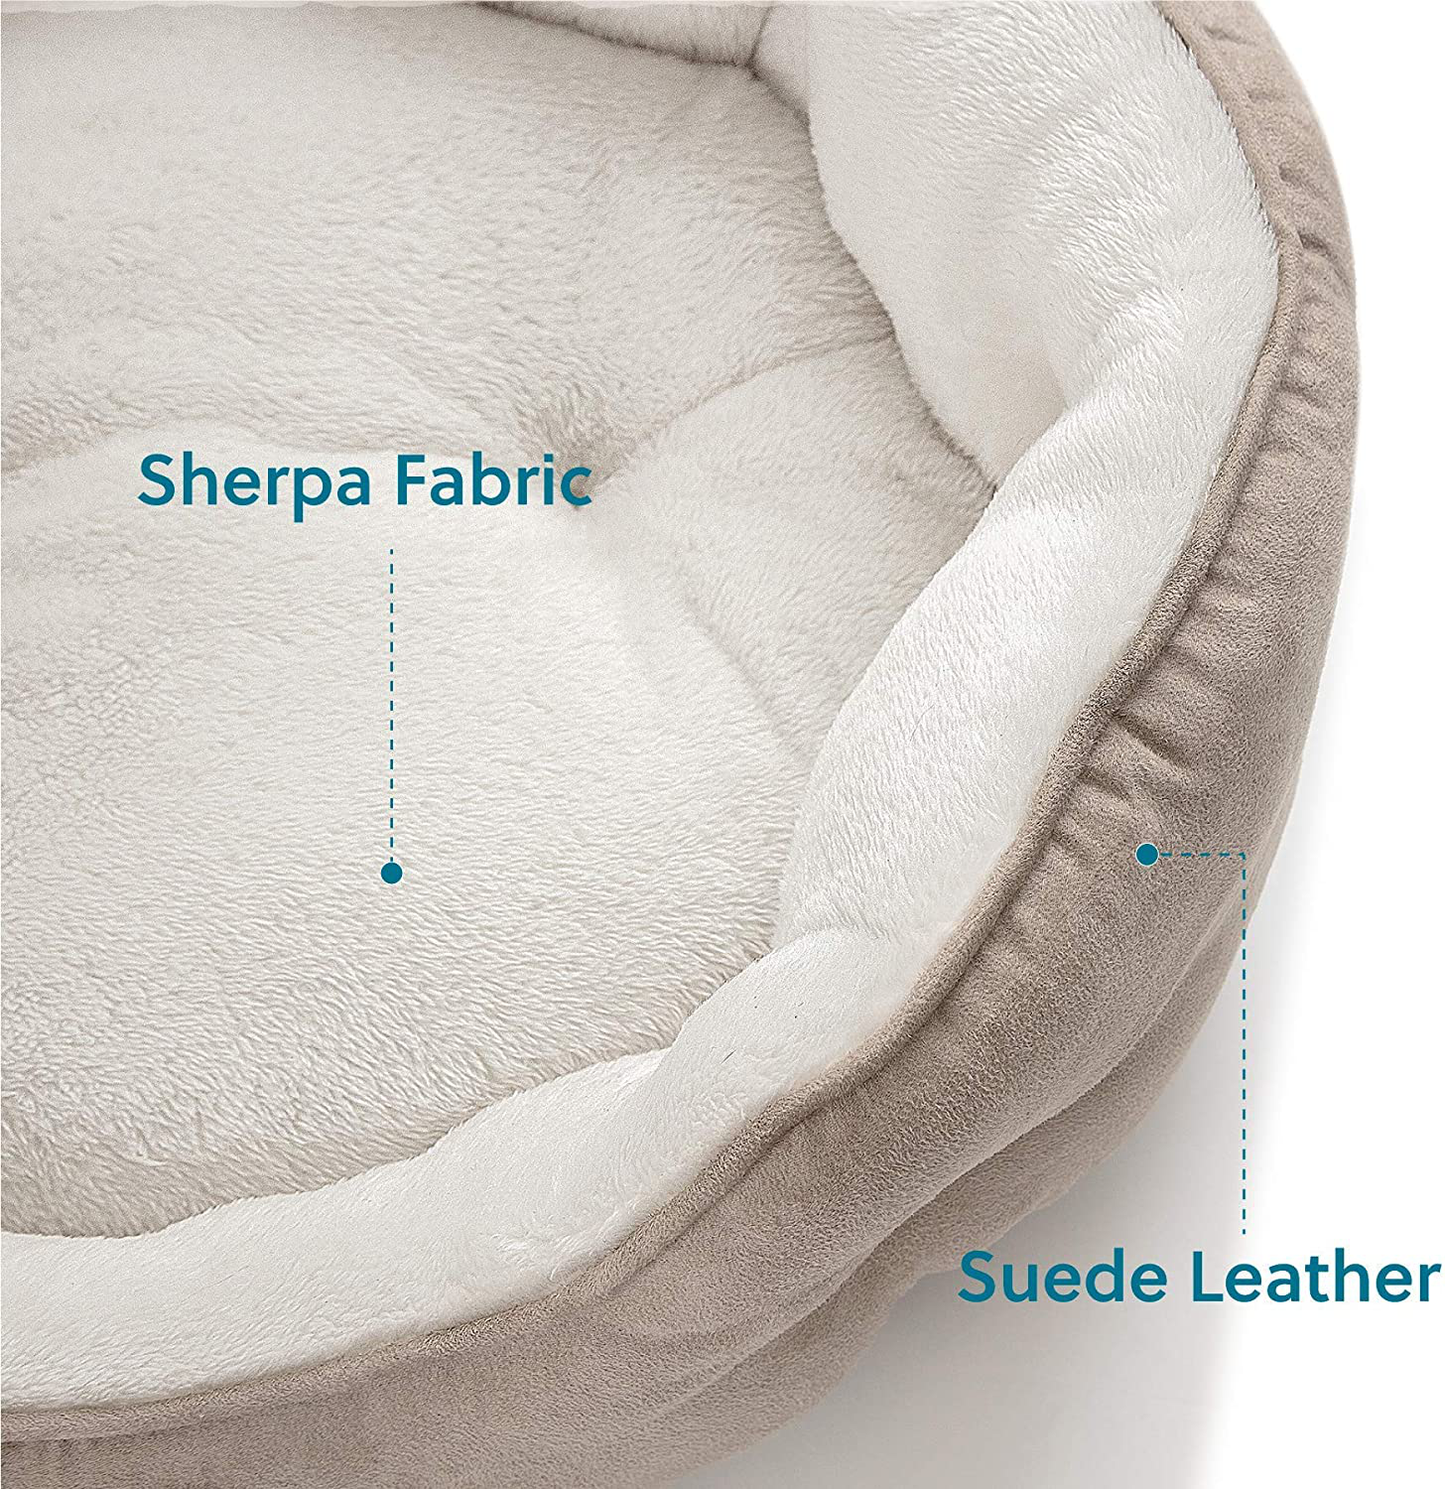 Bedsure Small Dog Bed for Small Dogs Washable - round Cat Beds for Indoor Cats, round Pet Bed for Puppy and Kitten with Slip-Resistant Bottom, 20 Inches